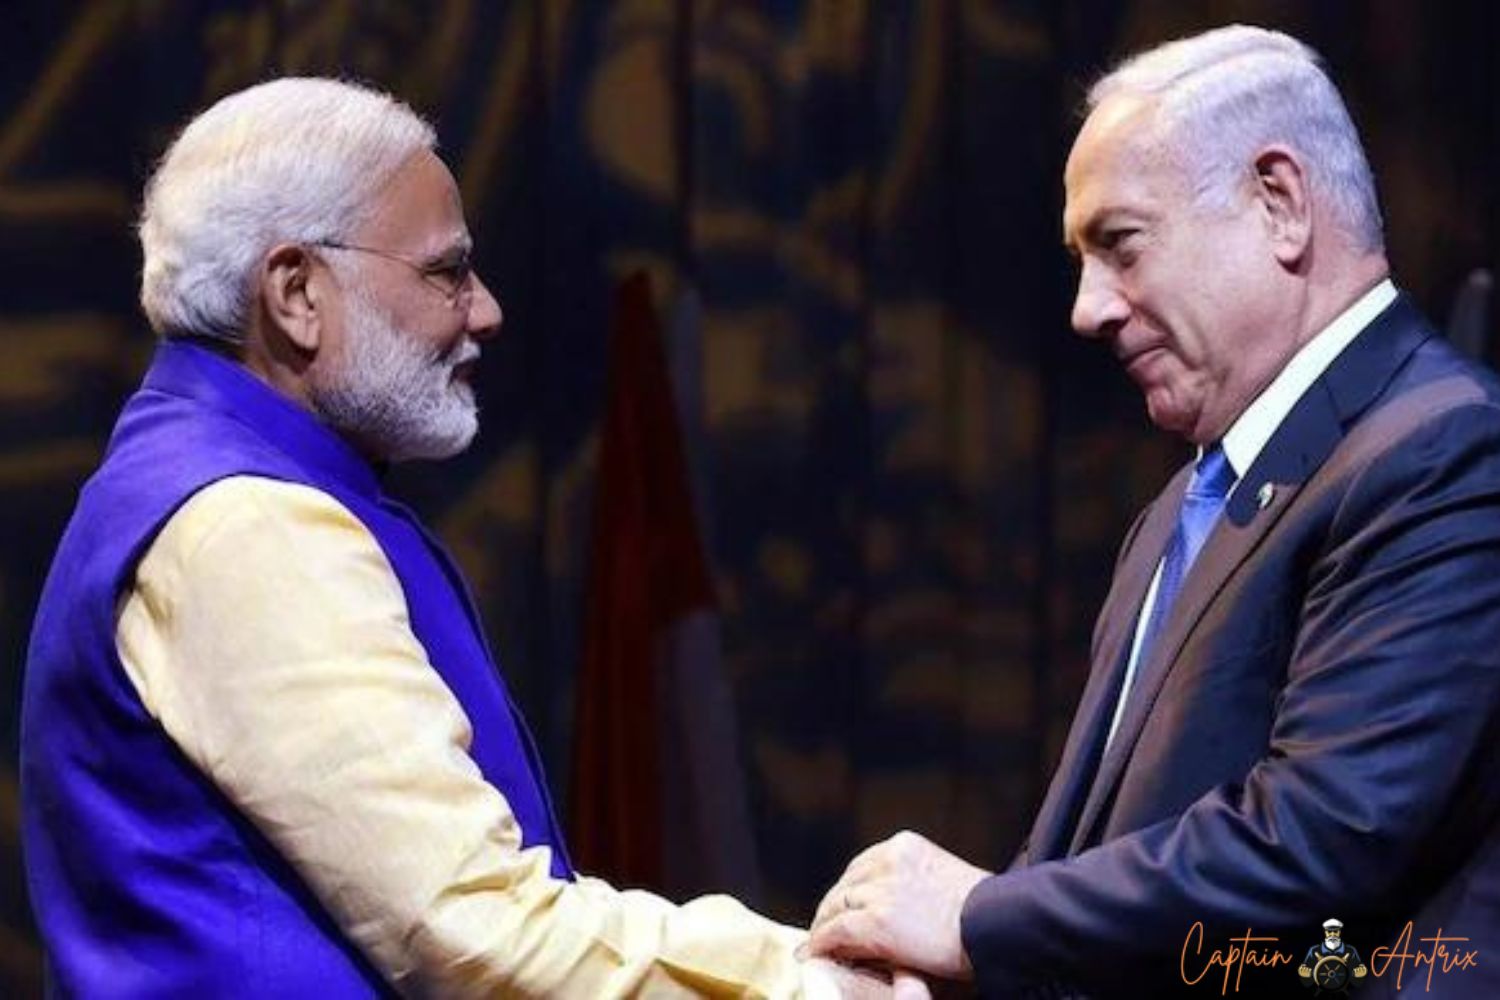 India Israel Relations: Analysis of Recent Hamas Attacks and Counterterrorism Efforts